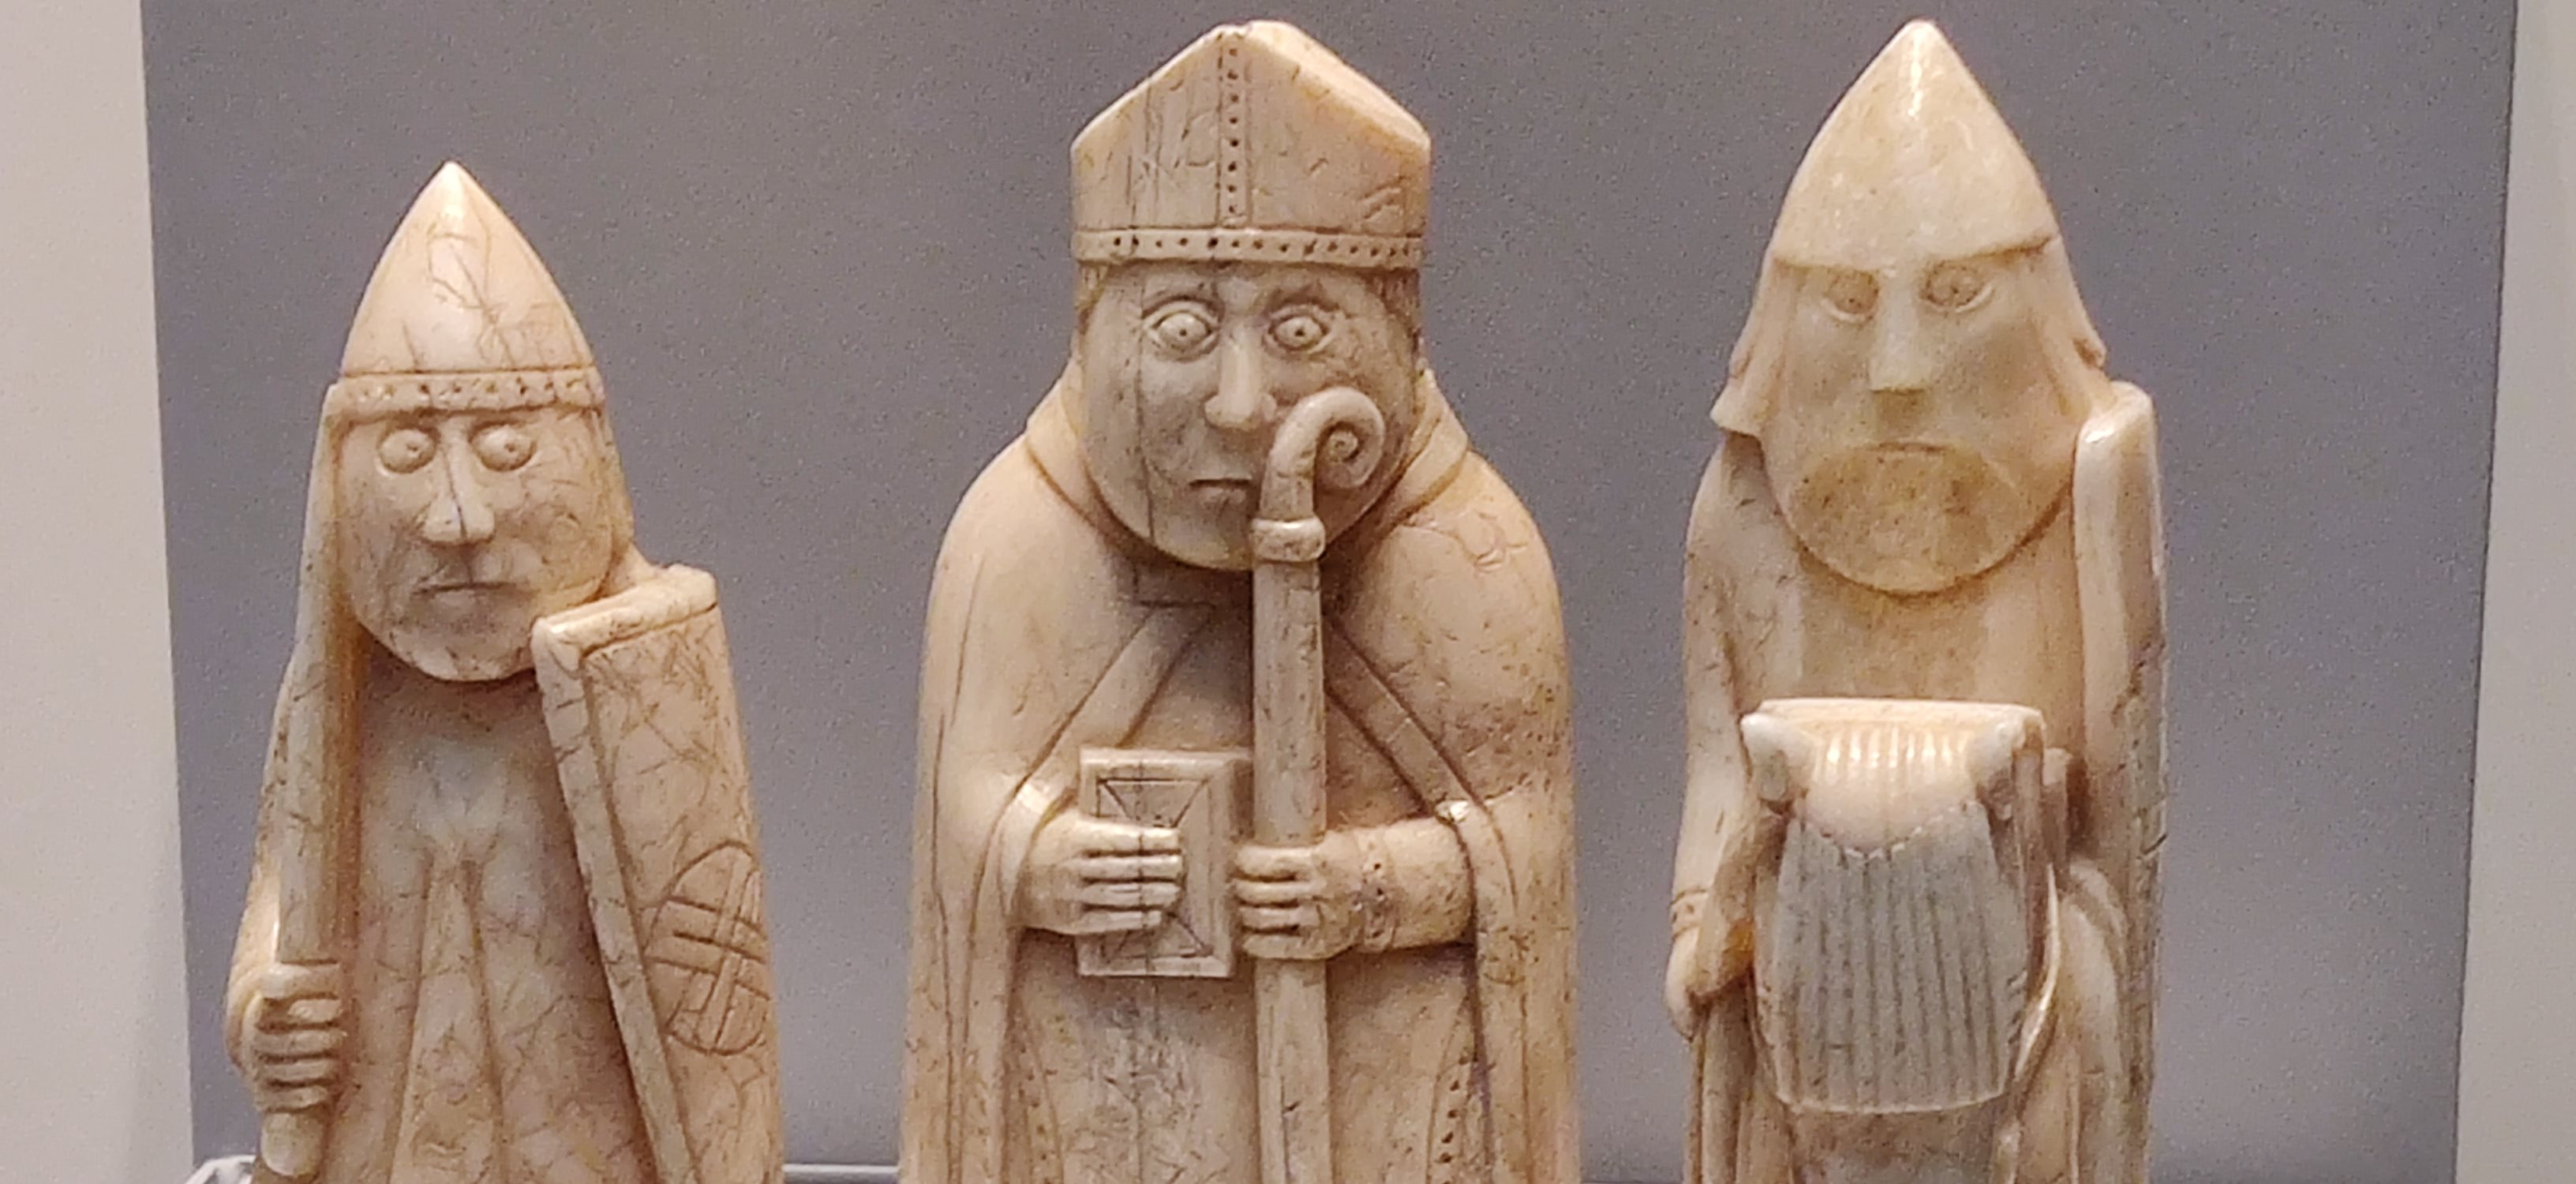 Lewis Chessmen with a bishop, a rook and a knight shown.